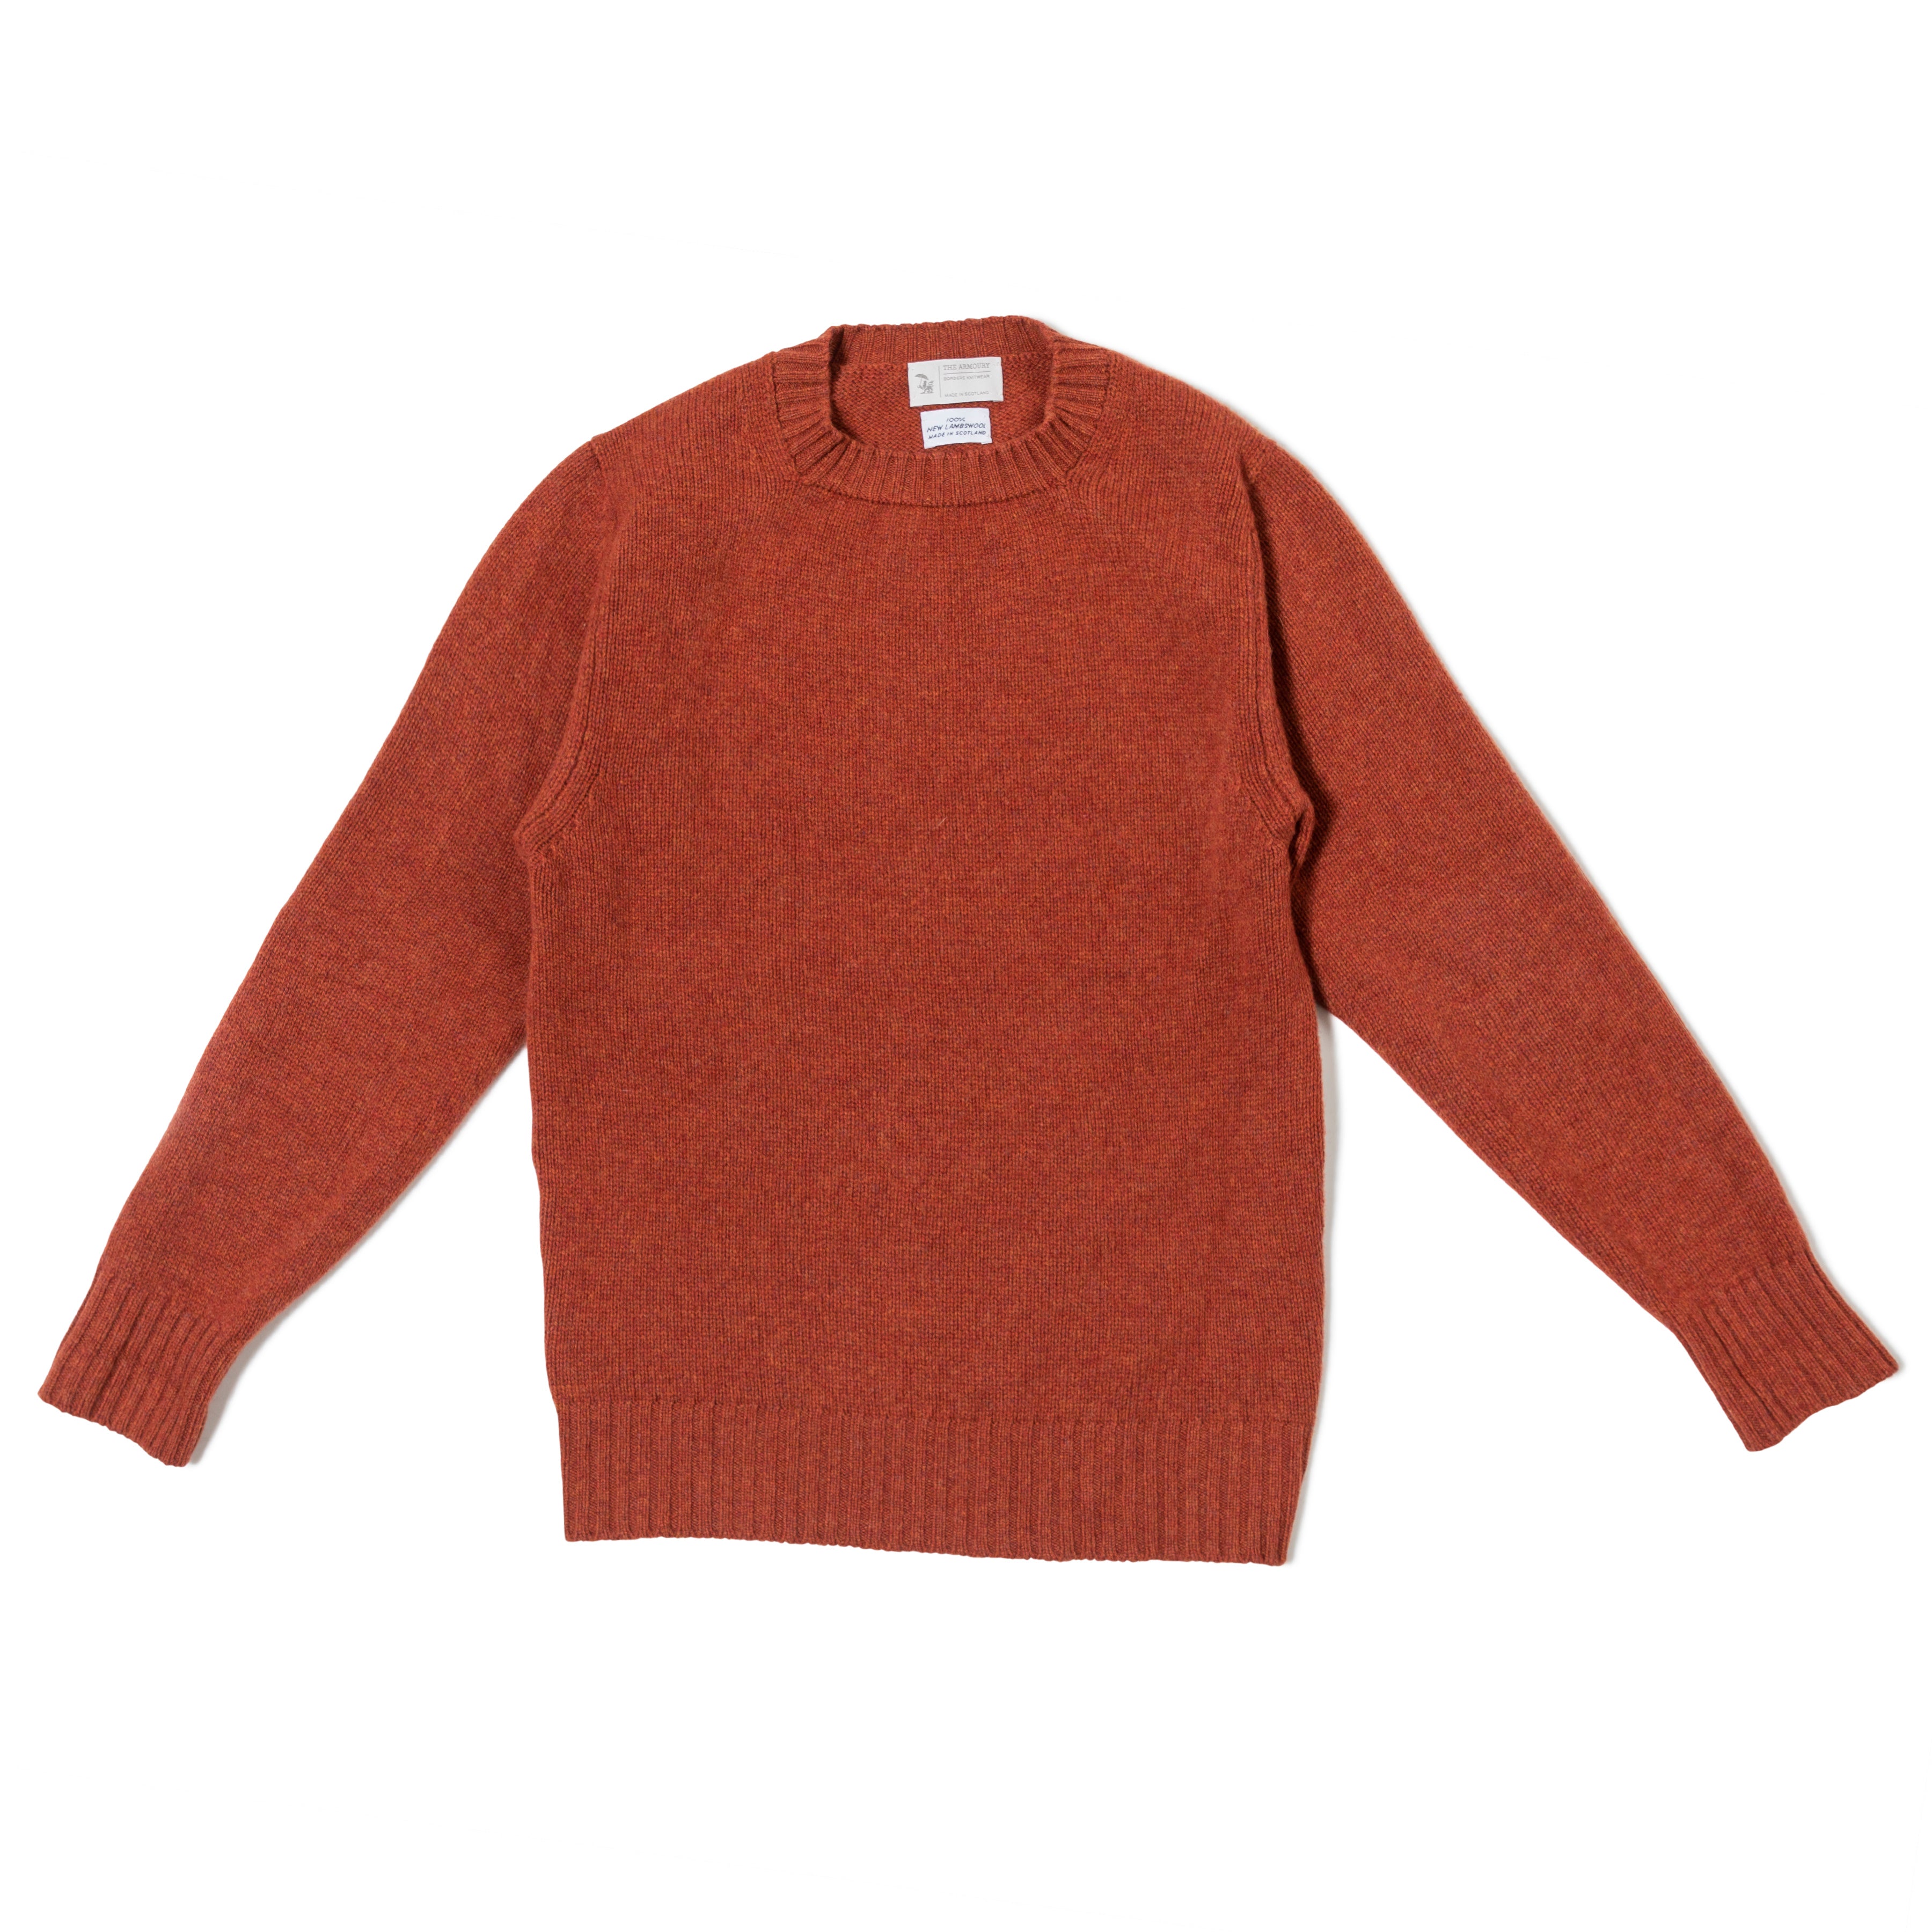 4-ply Lambswool Crewneck Sweater - The Armoury